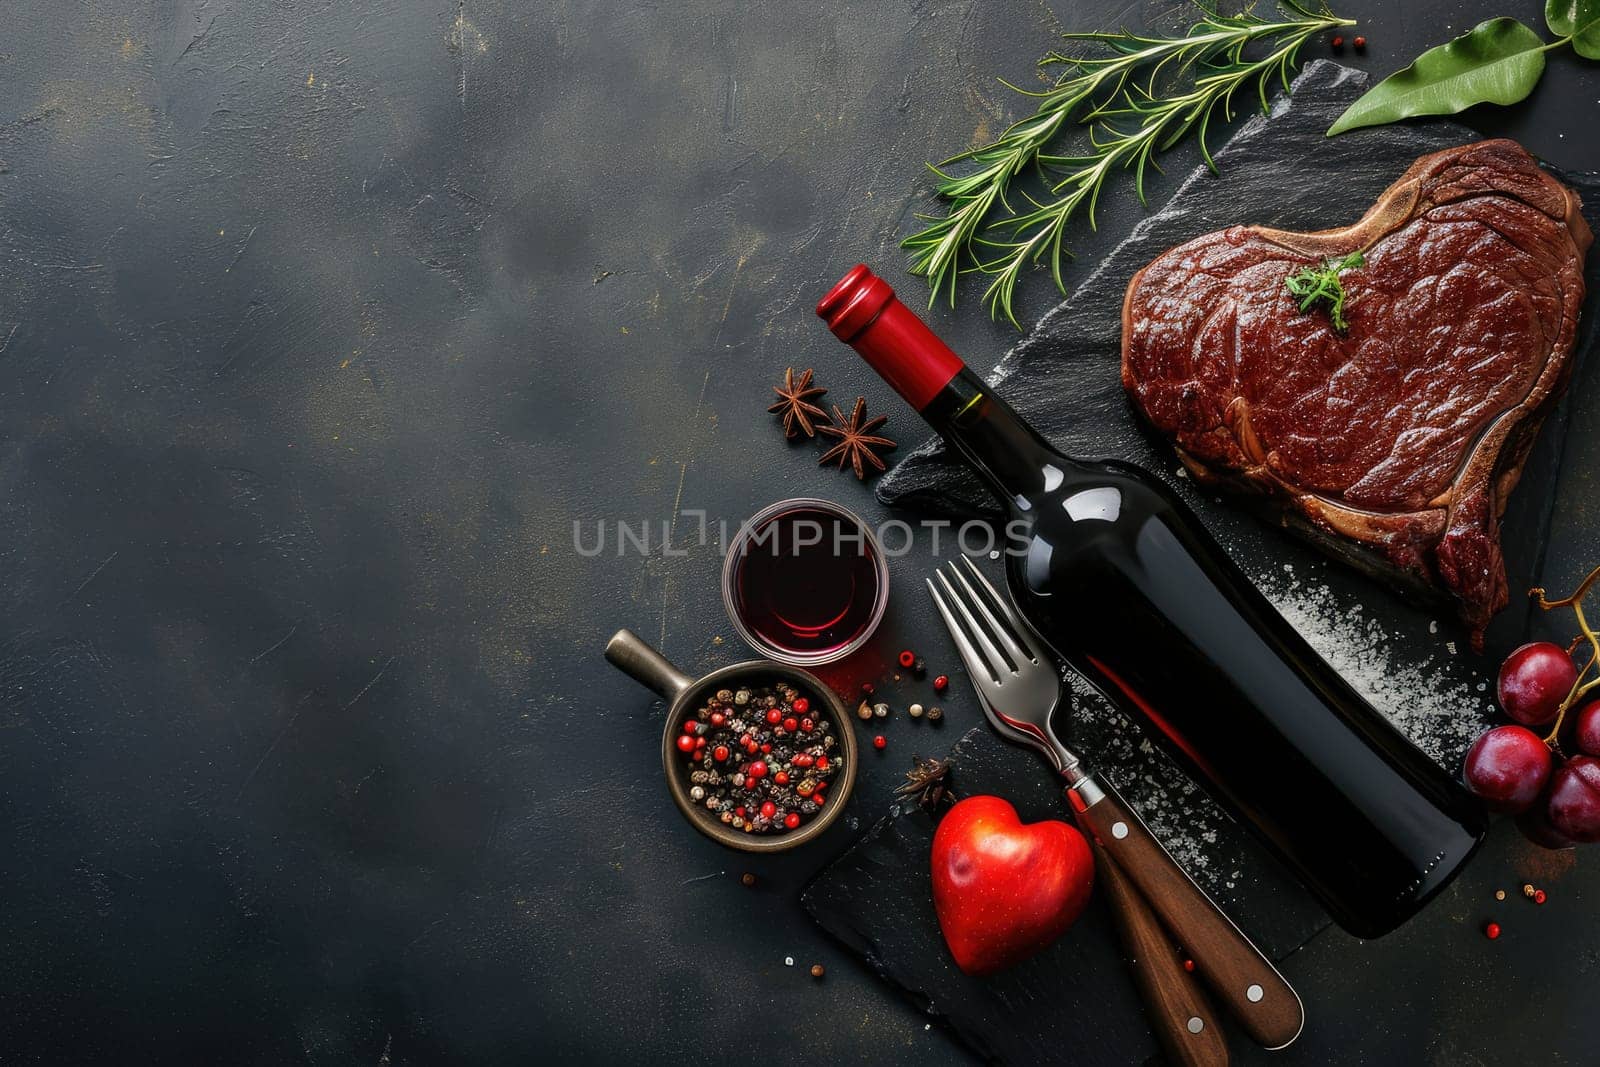 grilled beef steak for valentines day pragma by biancoblue